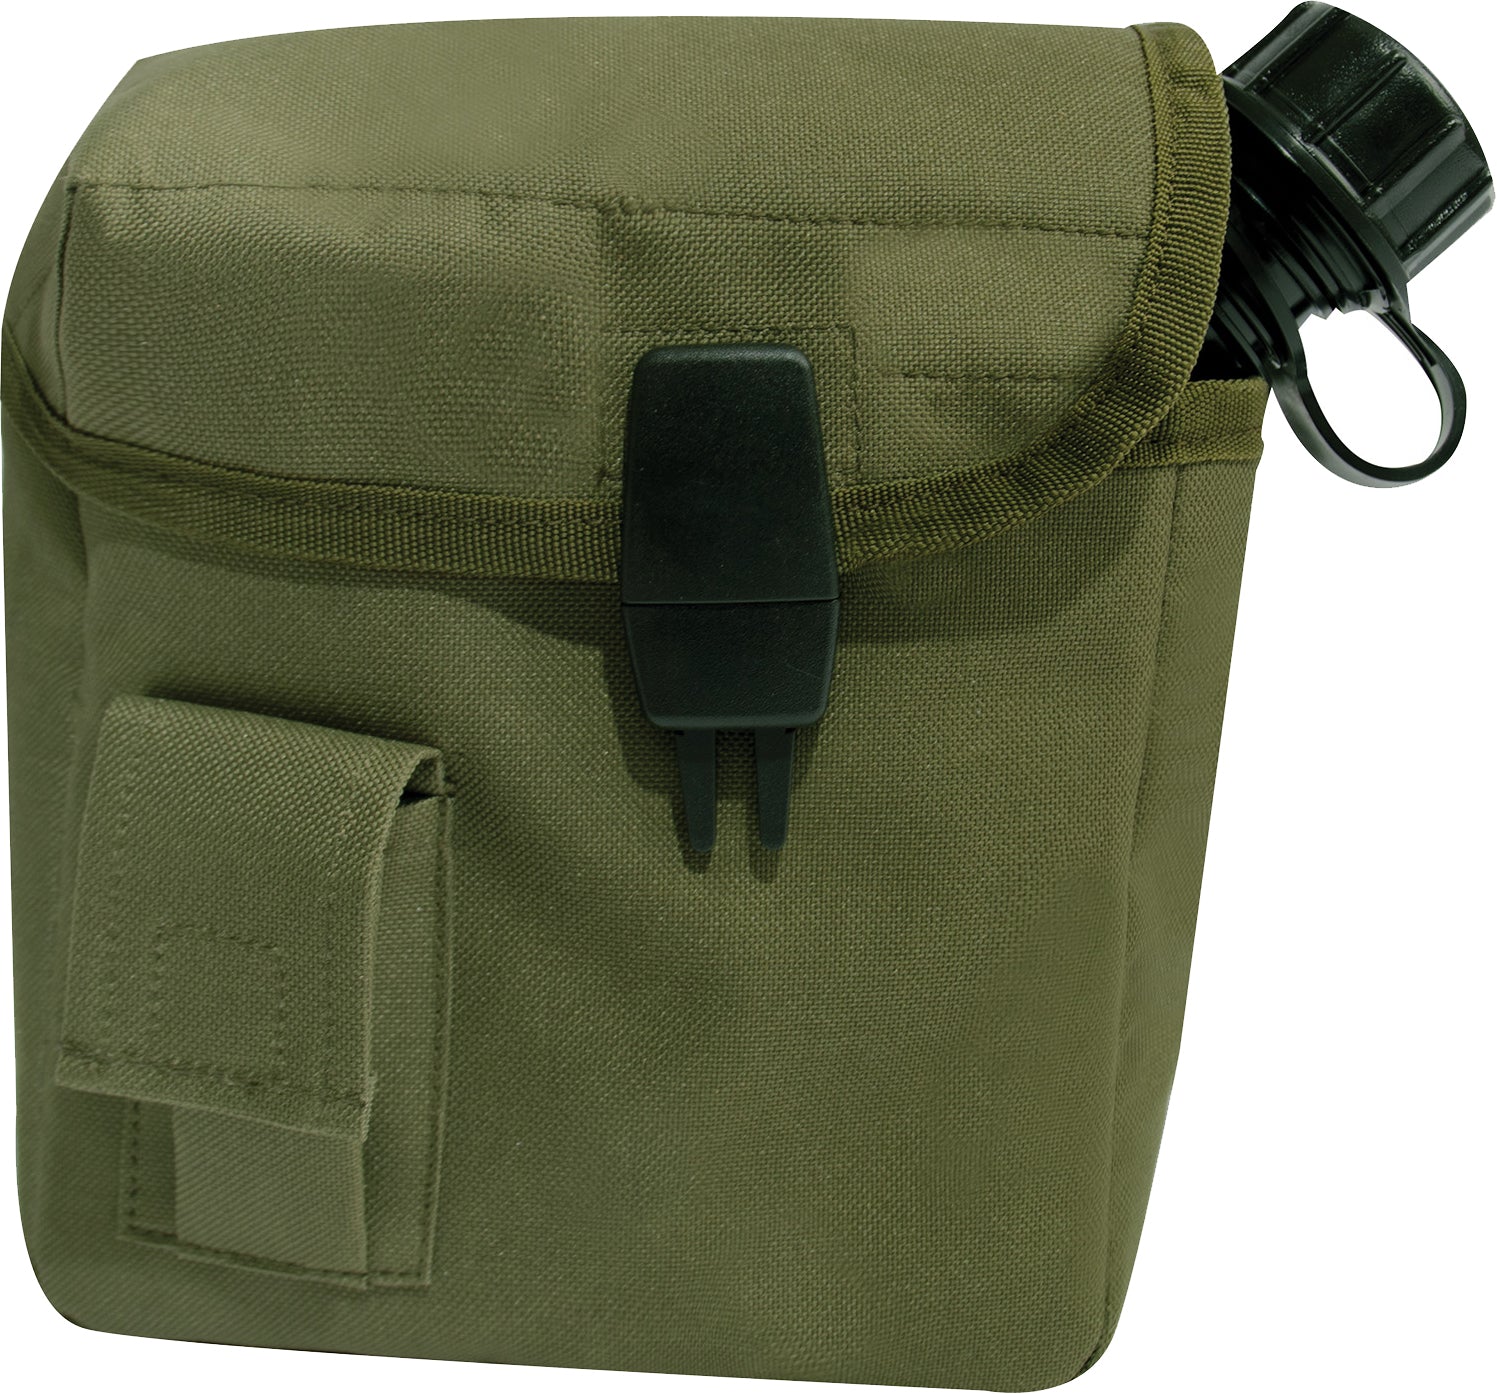 Olive Drab - MOLLE 2 QT. Bladder Canteen Cover